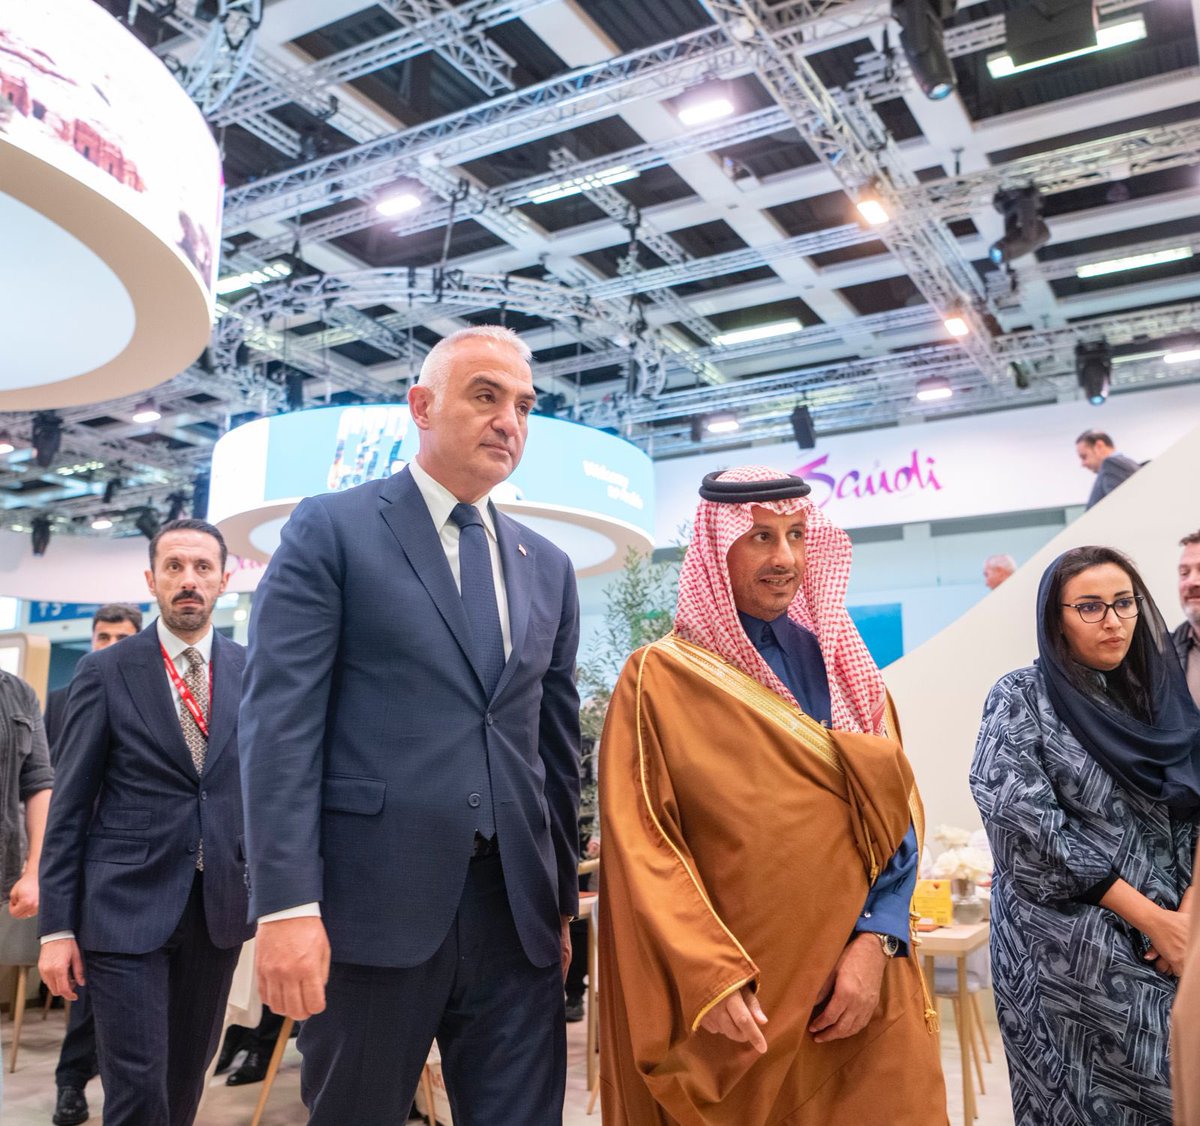 Great to see Minister @MehmetNuriErsoy of Turkey and @Saudi_Airlines CEO, H.E. Eng. Ibrahim Alomar discussing best practices to enhance visitor journey &amp; ease of doing business in #tourism sector.
Collaboration is key! 
#ITBBerlin #SaudiArabia #Turkey #Travel #Hospitality 